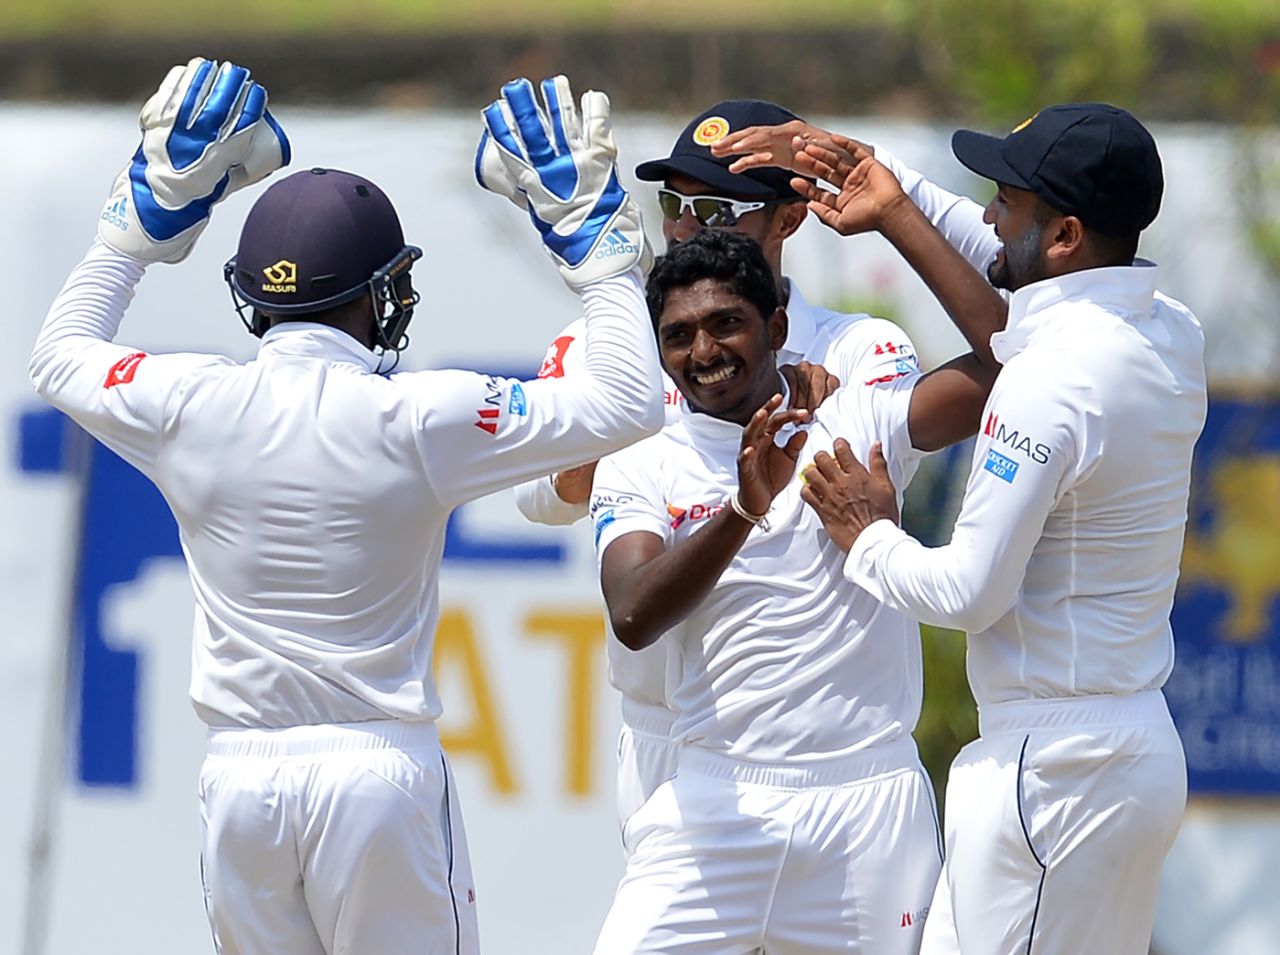 Lakshan Sandakan is mobbed by his team-mates upon picking a wicket, Sri Lanka v South Africa, 1st Test, Galle, 2nd day, July 13, 2018